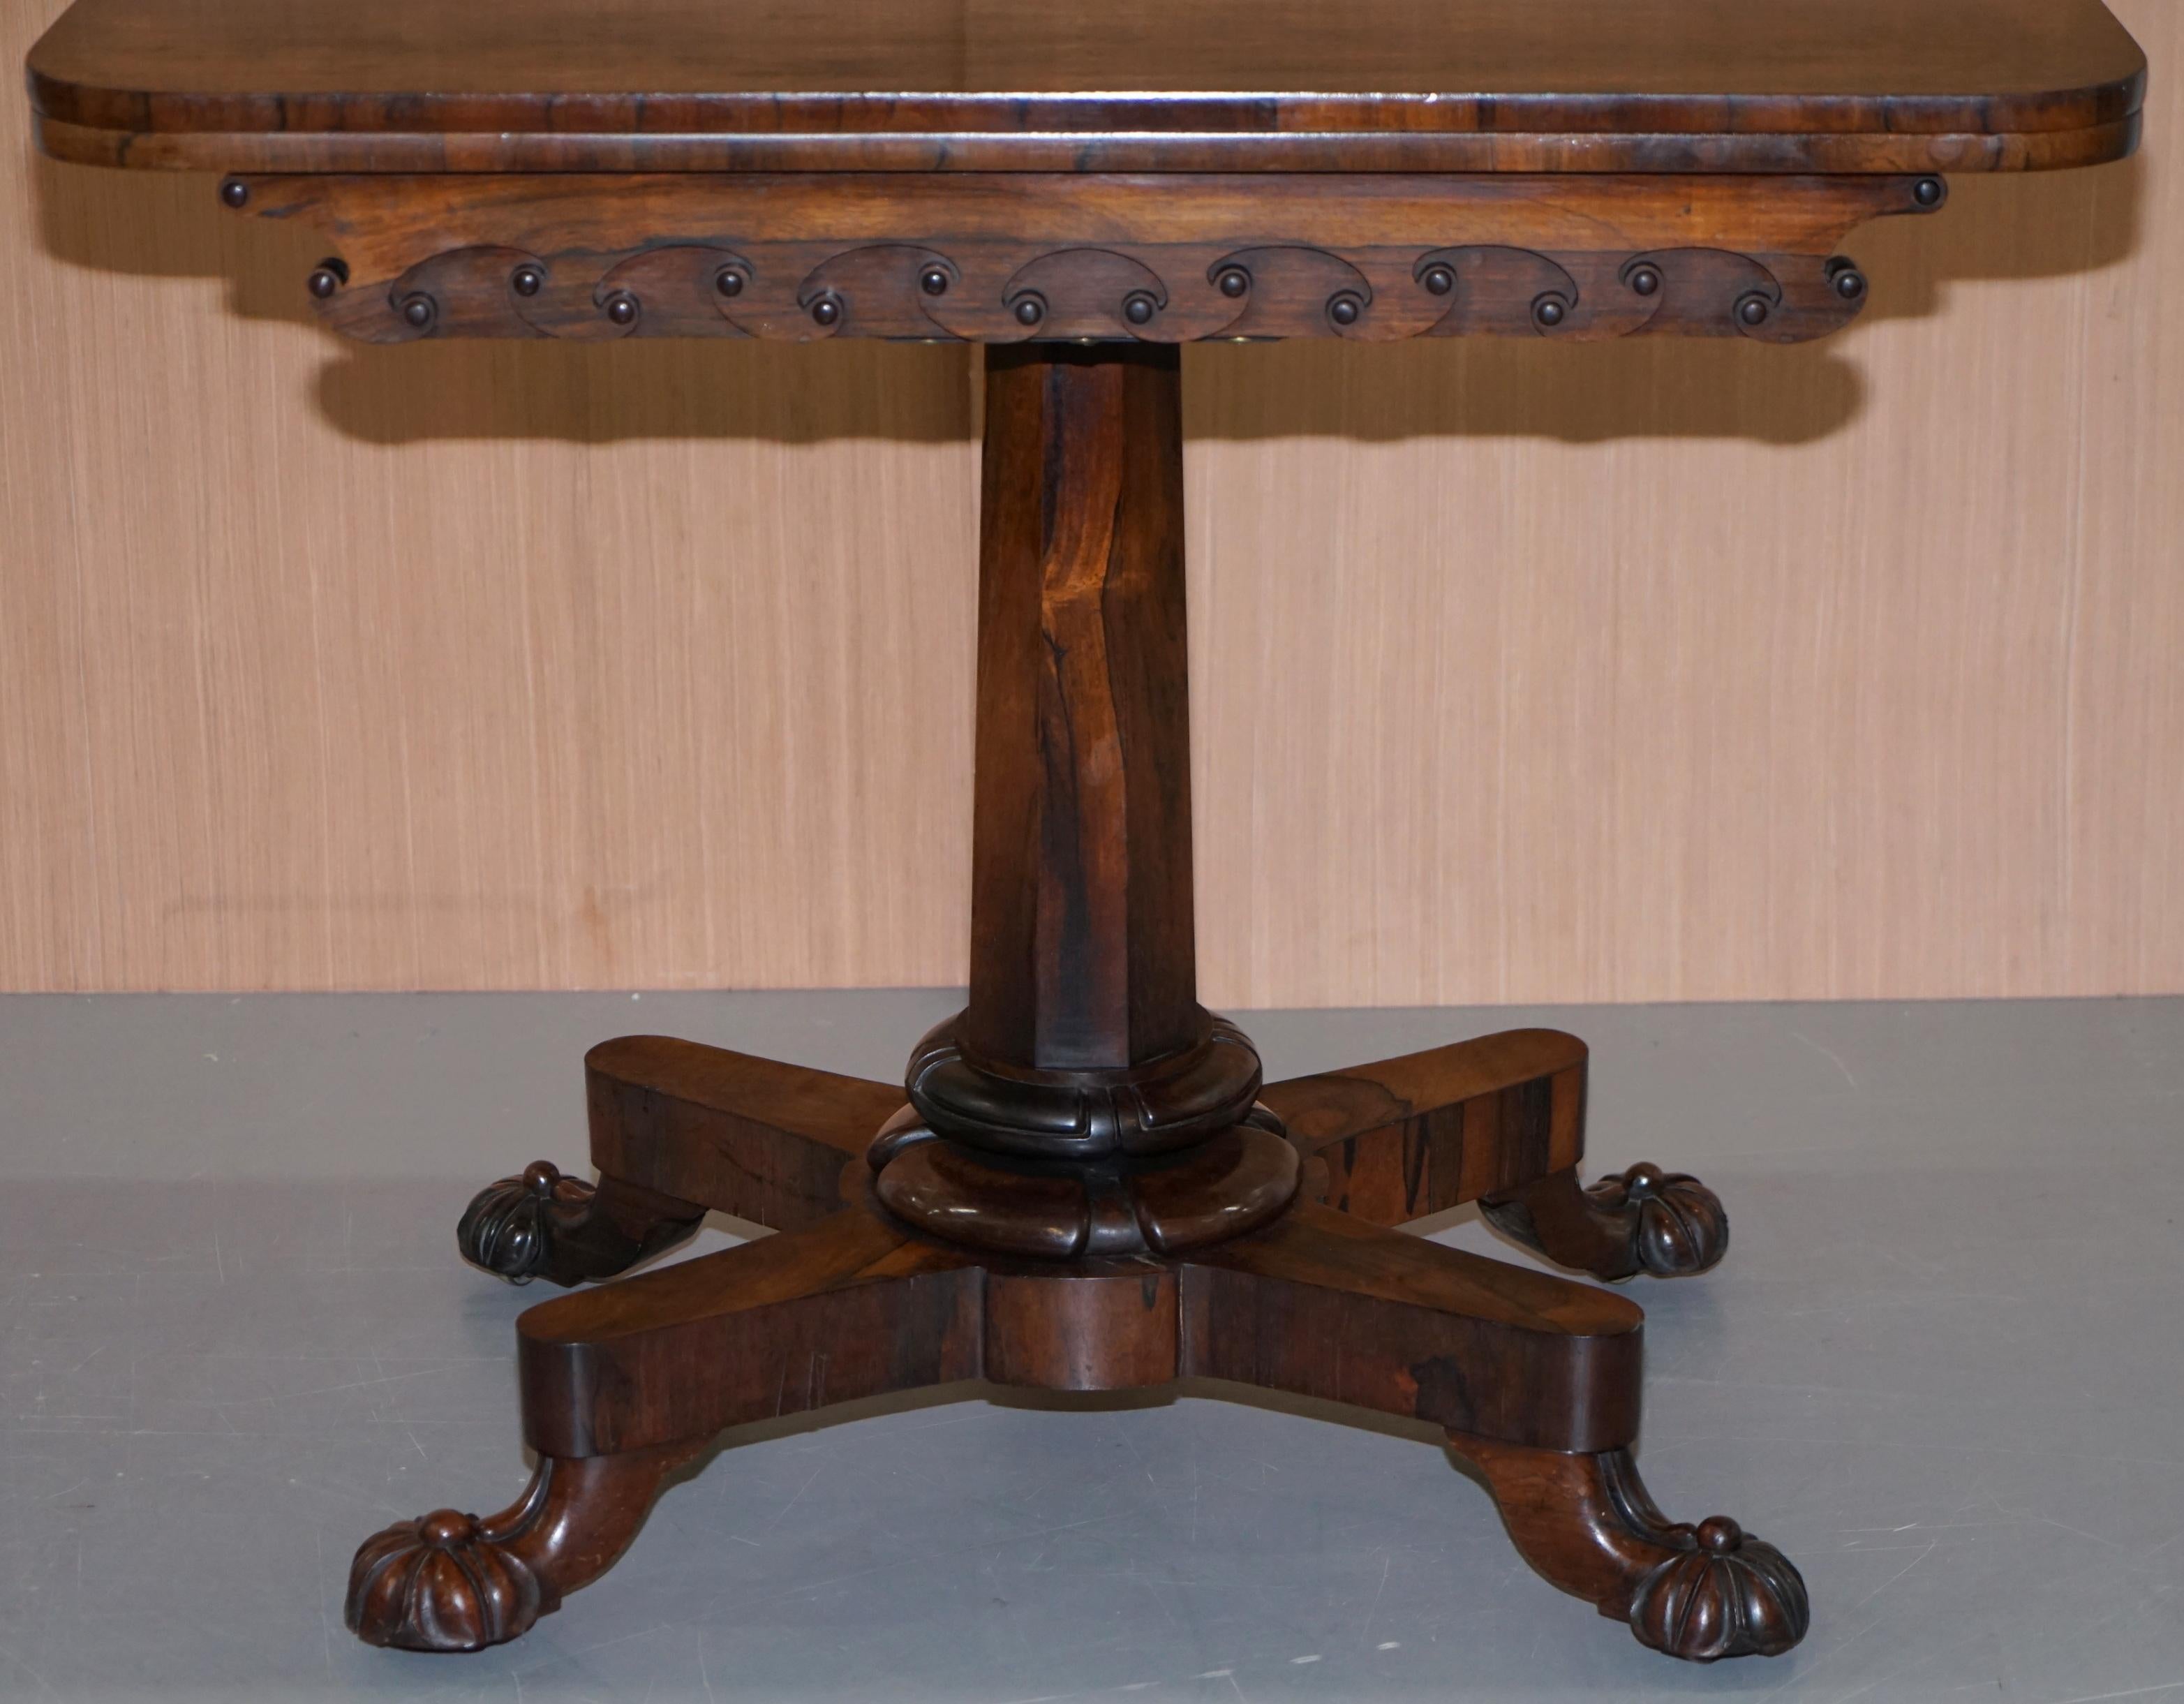 Hand-Crafted Stunning Original J Kendell & Co circa 1830 Redwood Tea Card Table Sublime For Sale